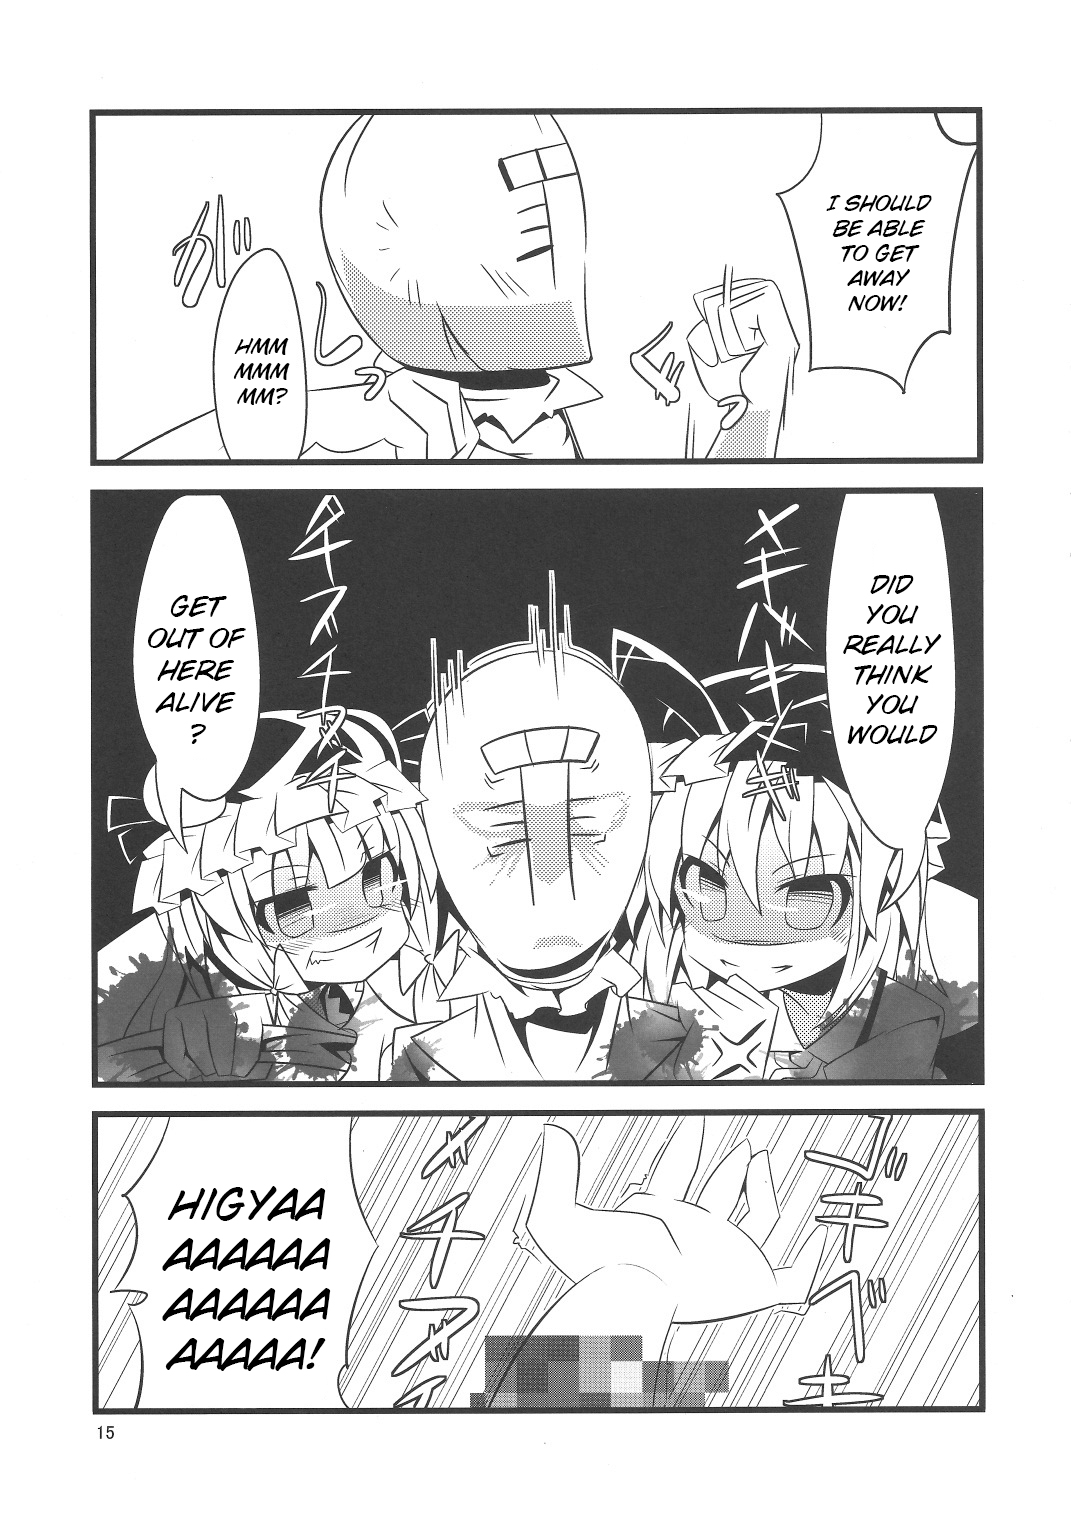 (Kouroumu 7) [Angelic Feather (Land Sale)] Tentacle Play (Touhou Project) [English] page 14 full